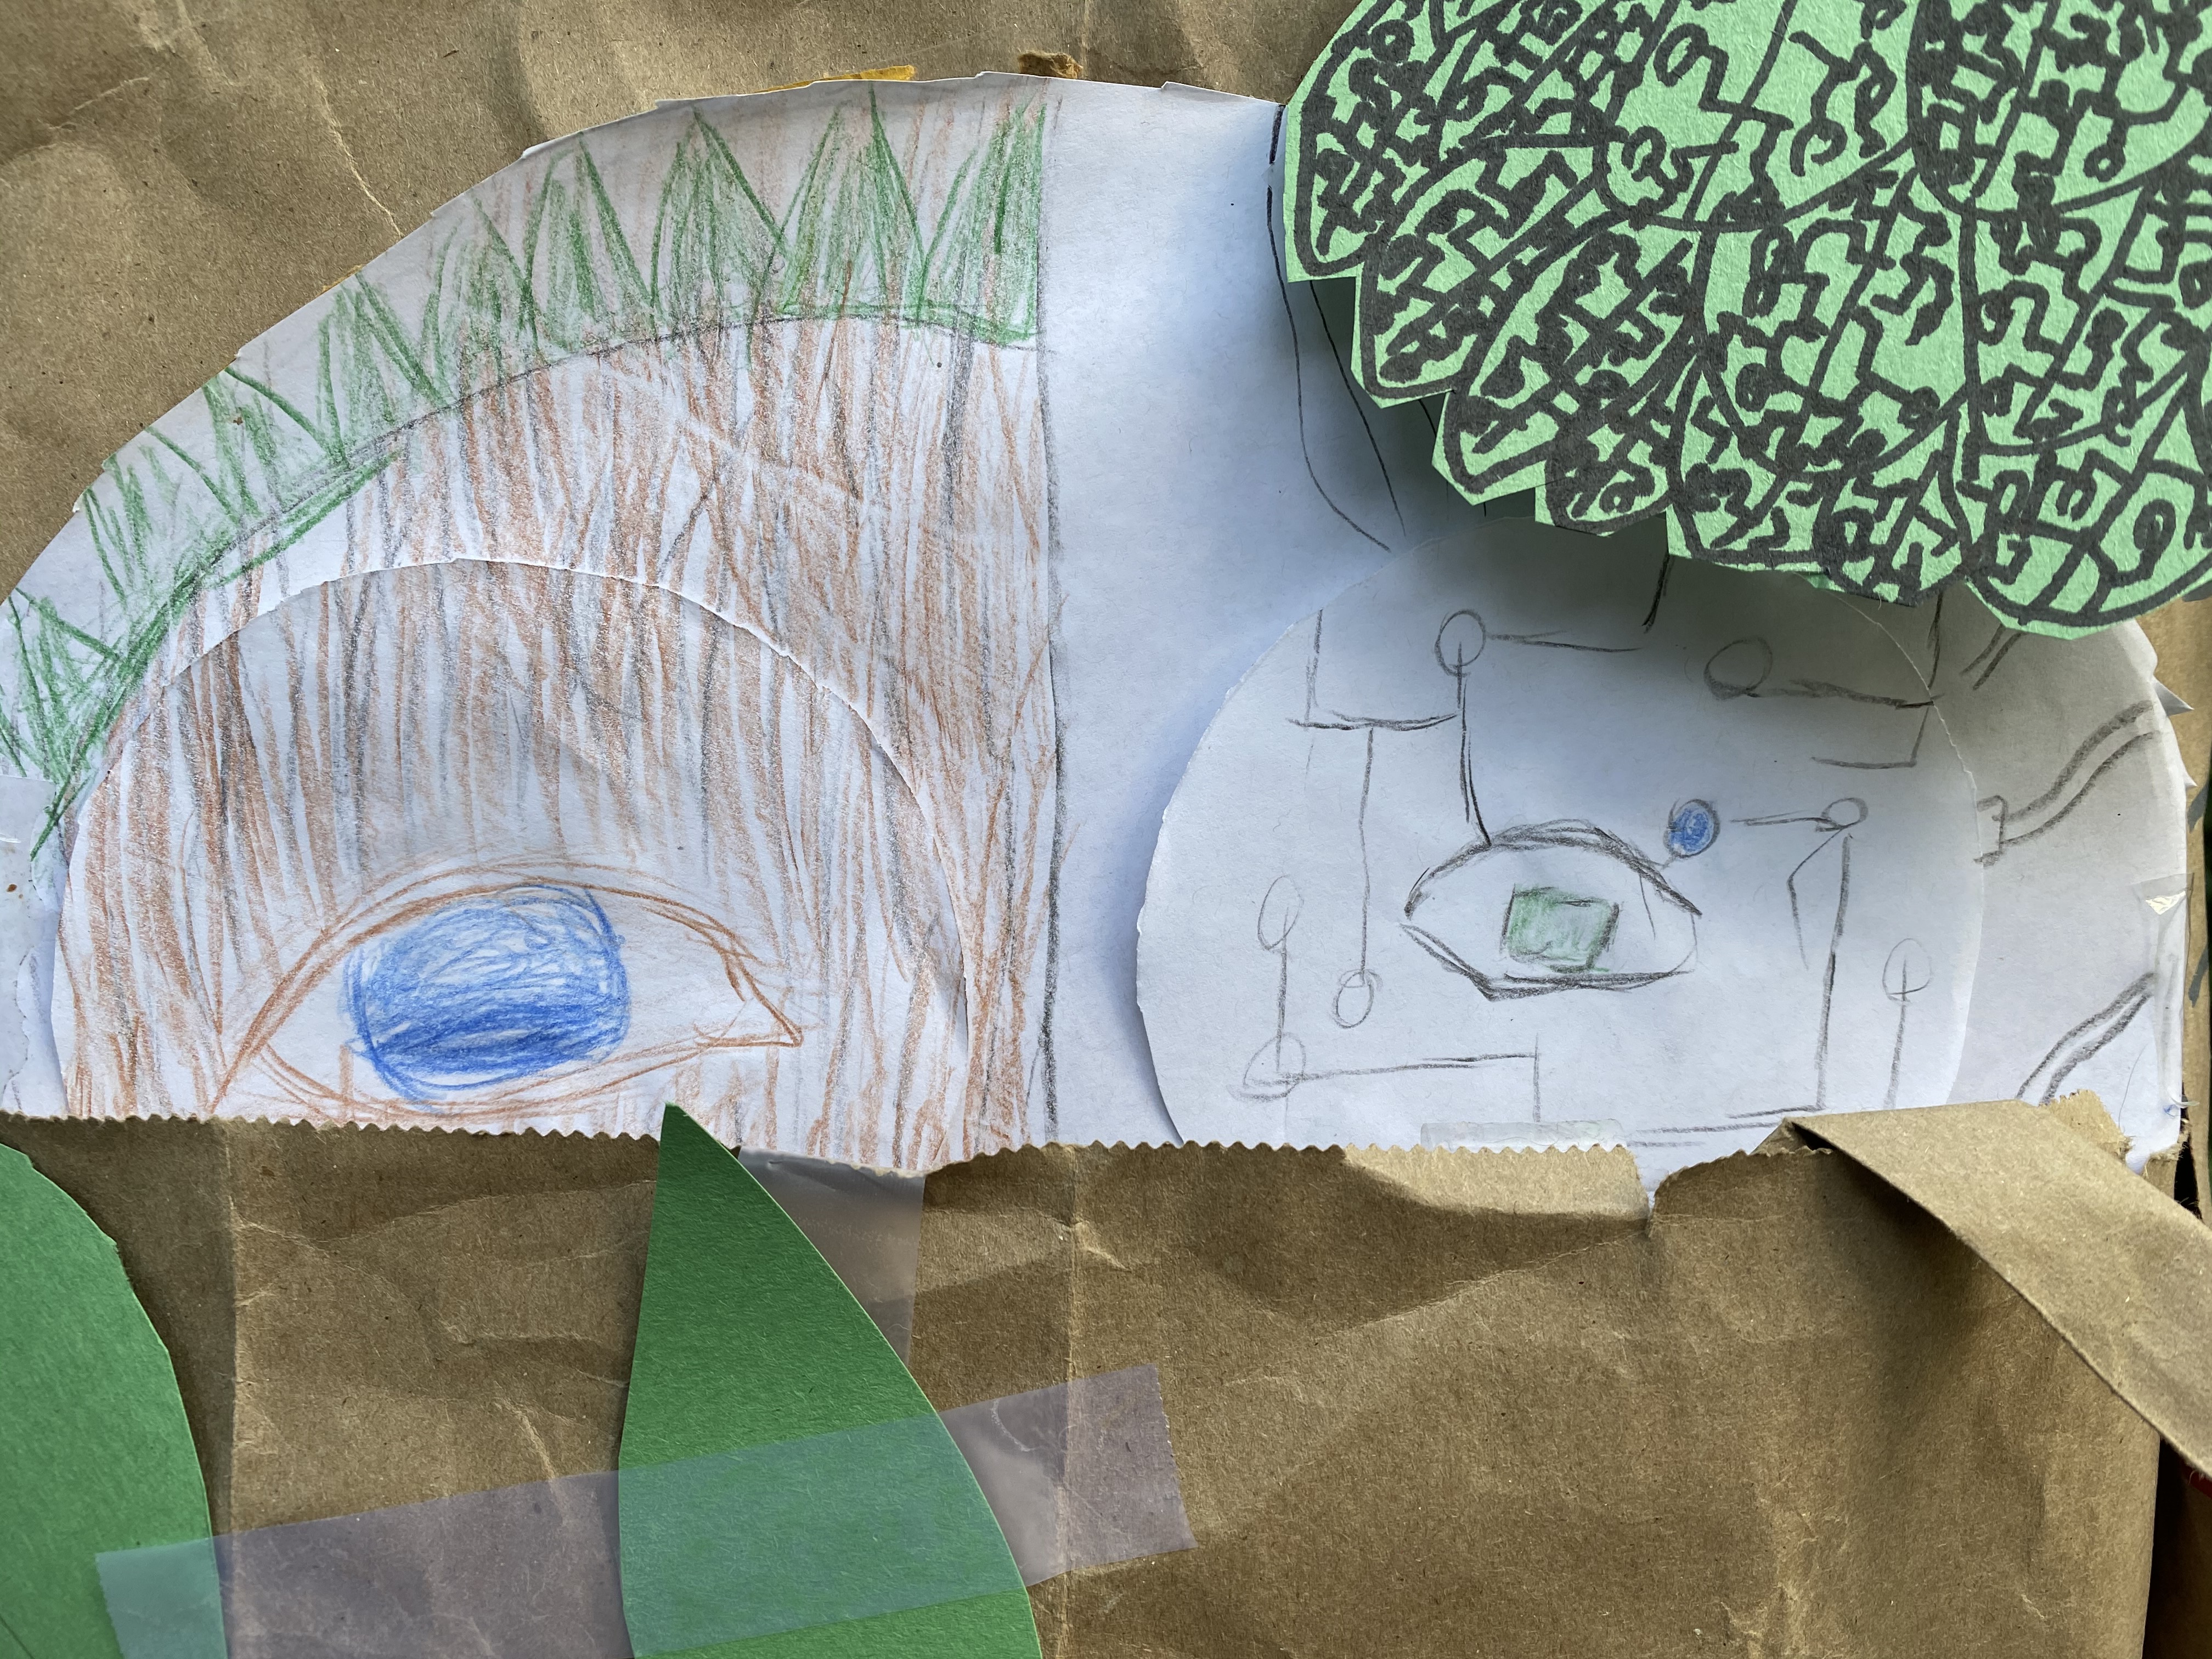 A children's craft project made out of a paperplate and brown paper. The paper plate has been divided in half. The left half contains the image of a face in the bark of a tree - this image represents nature. The right side of the drawing features the other side of the face, but this side is composed of microchips.